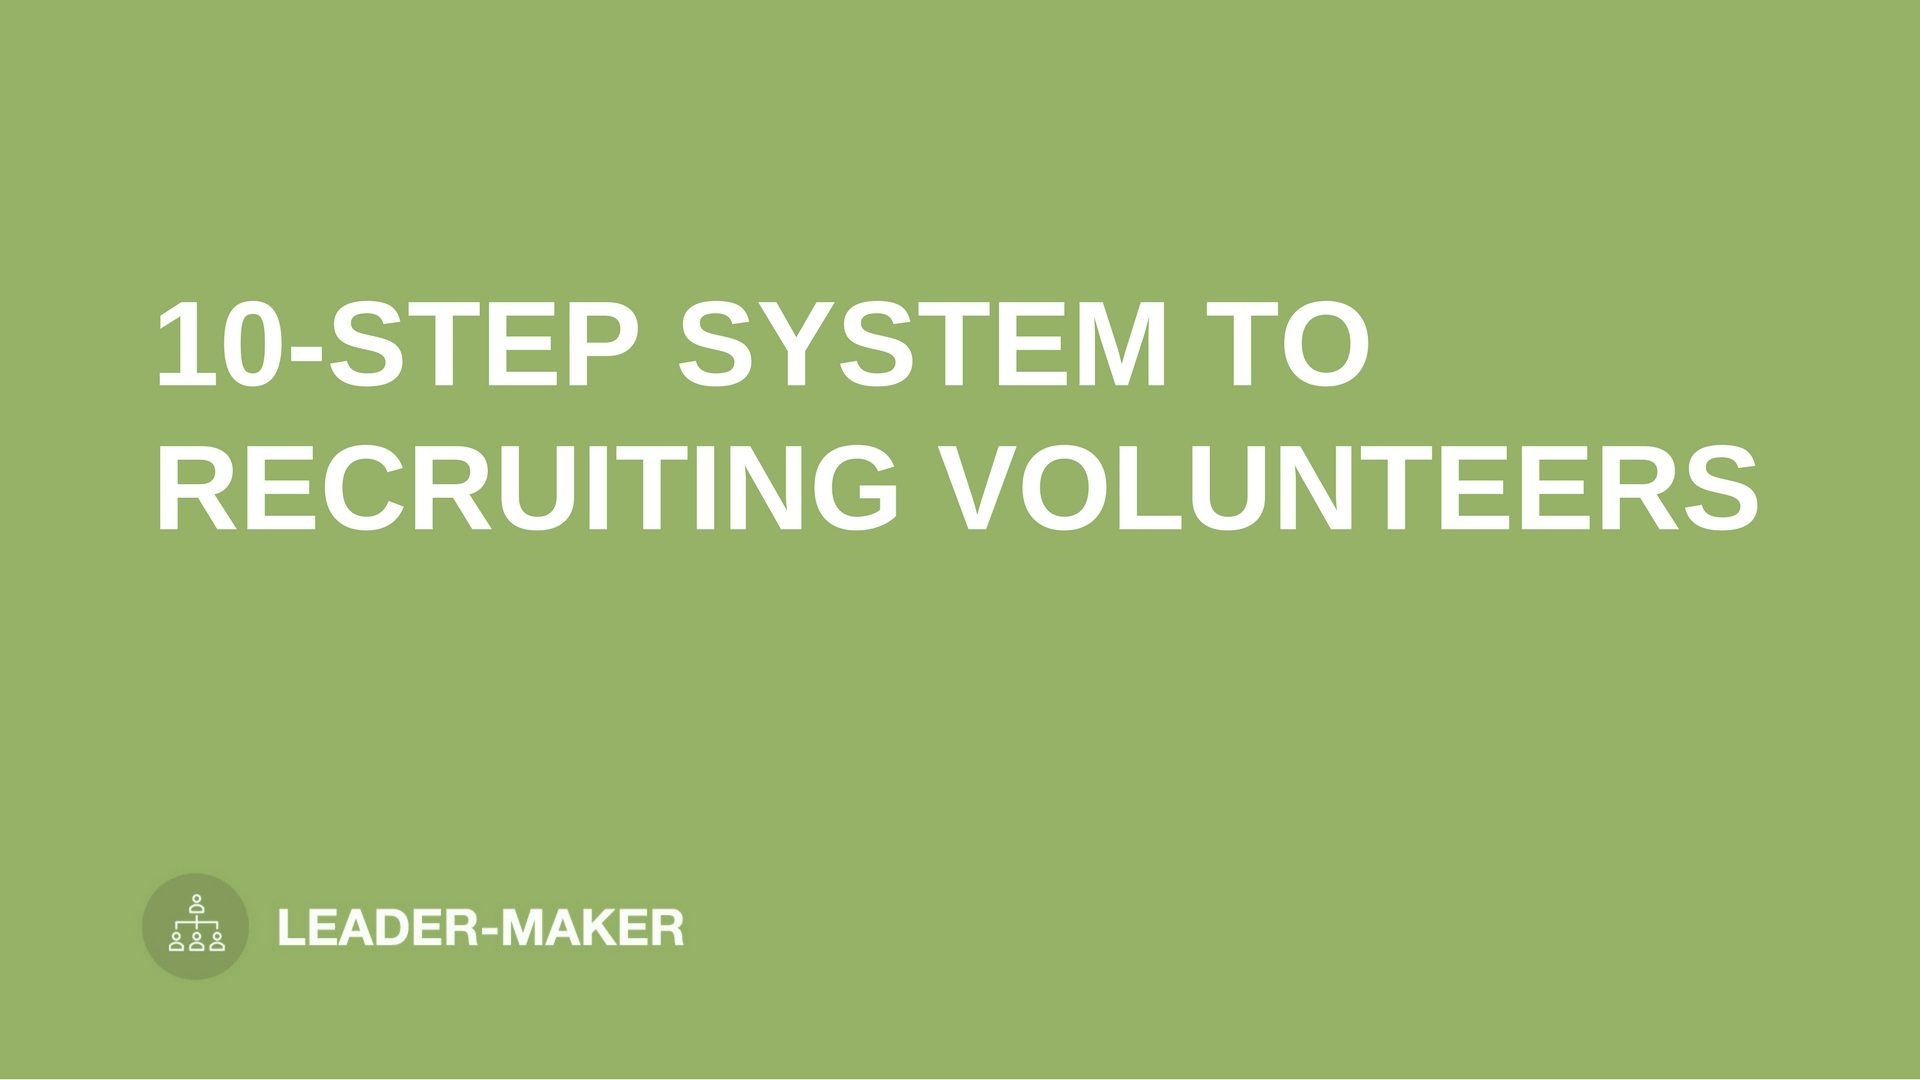 text "10-STEP SYSTEM TO RECRUITING VOLUNTEERS" on green background leaders.church